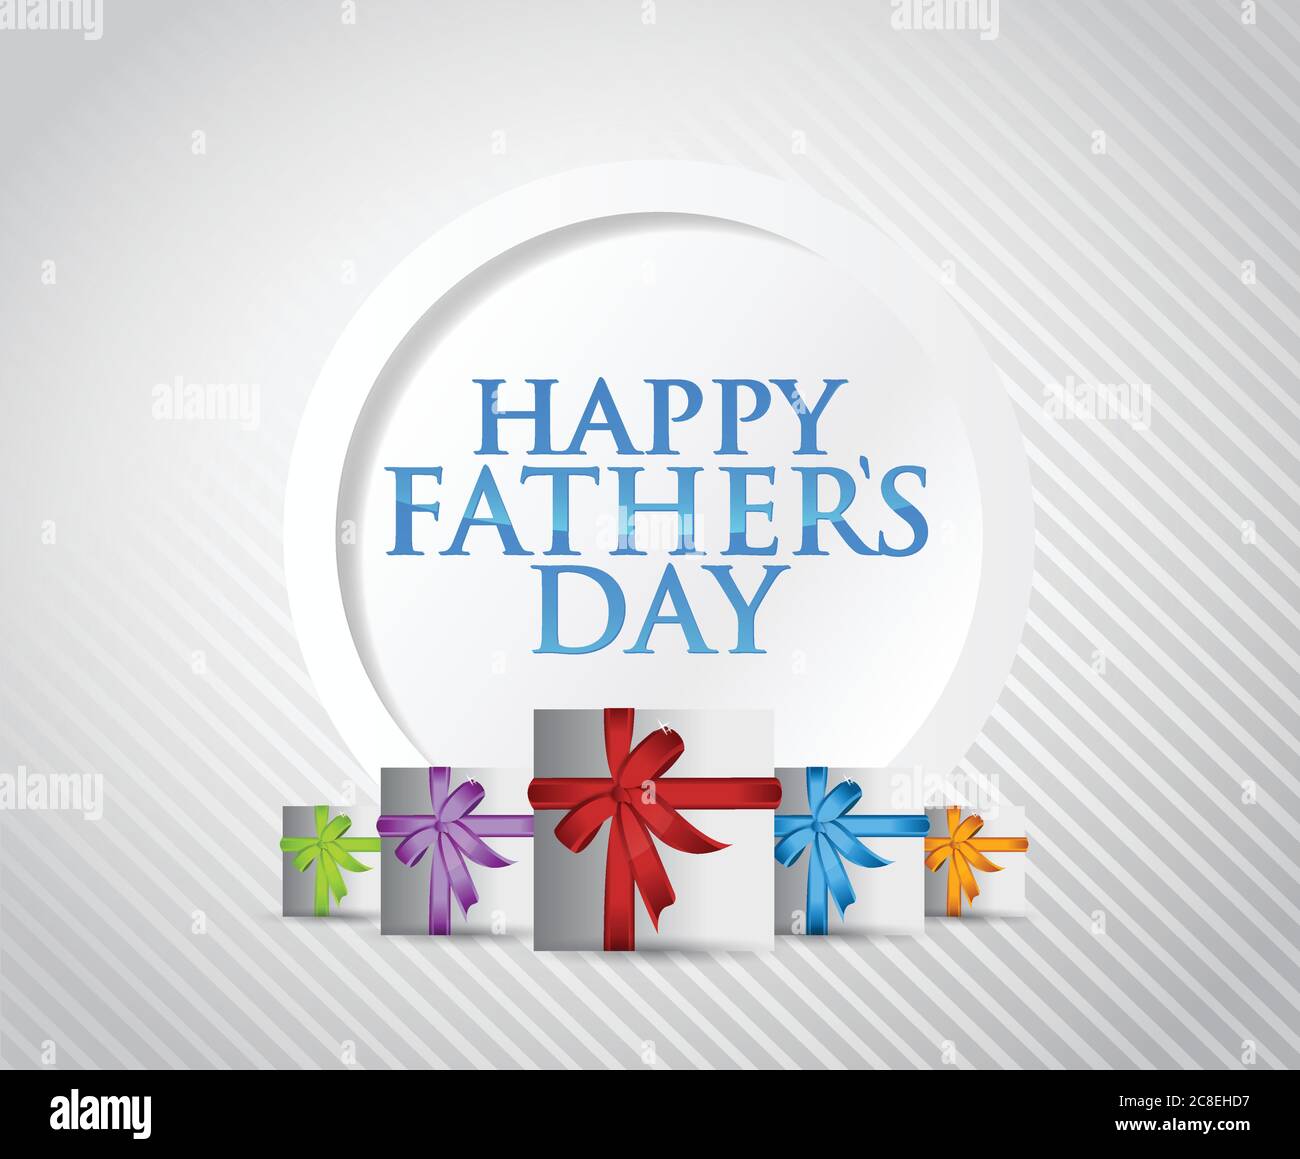 Happy fathers day gift card illustration design over a white background Stock Vector